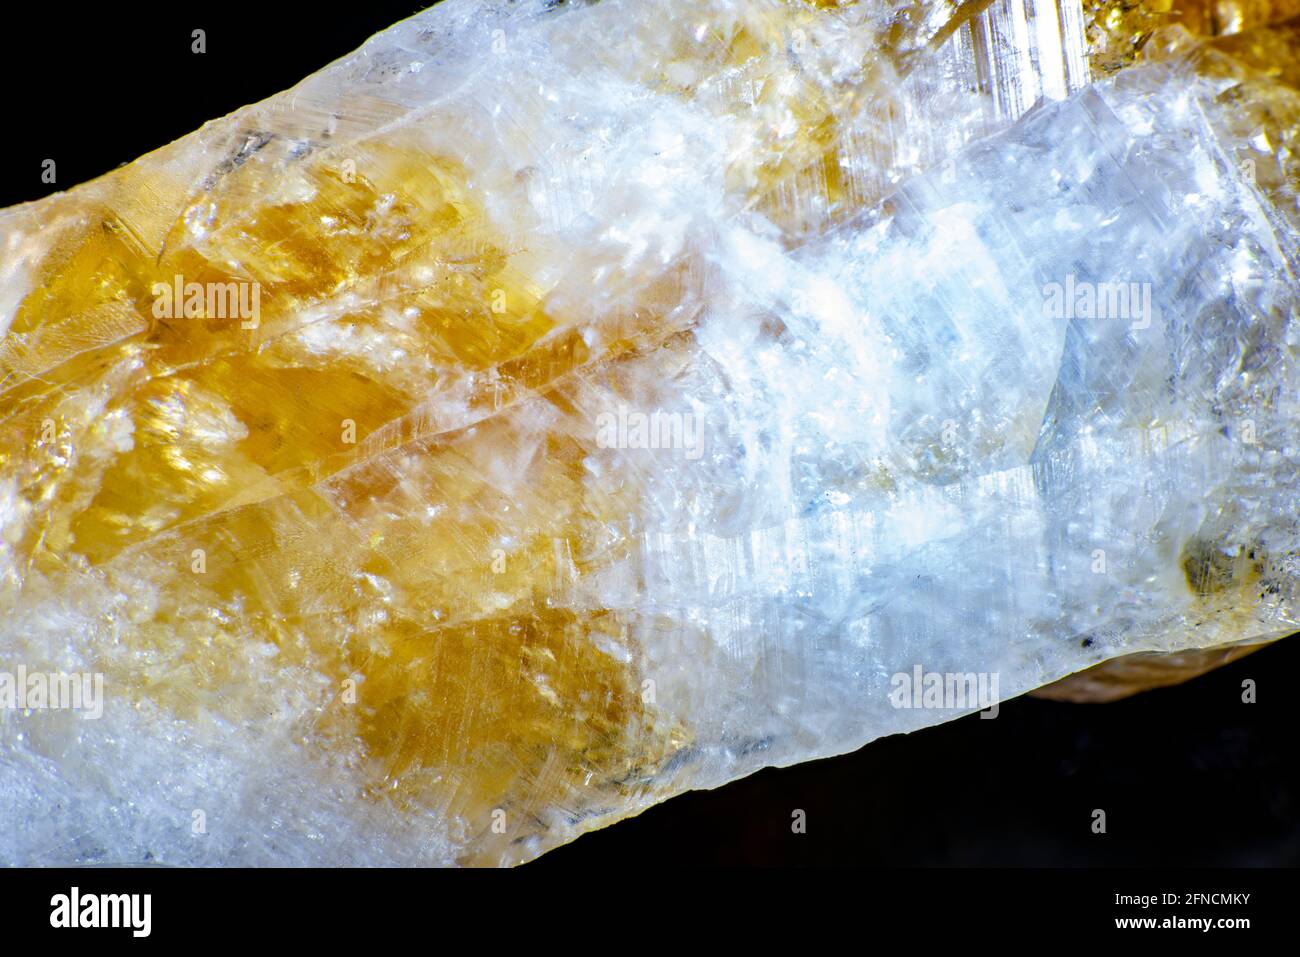 macro shooting of natural rock specimen. Raw crystal of Citrine yellow quartz gemstone from Brazil. Shimmering gold background. High quality photo Stock Photo